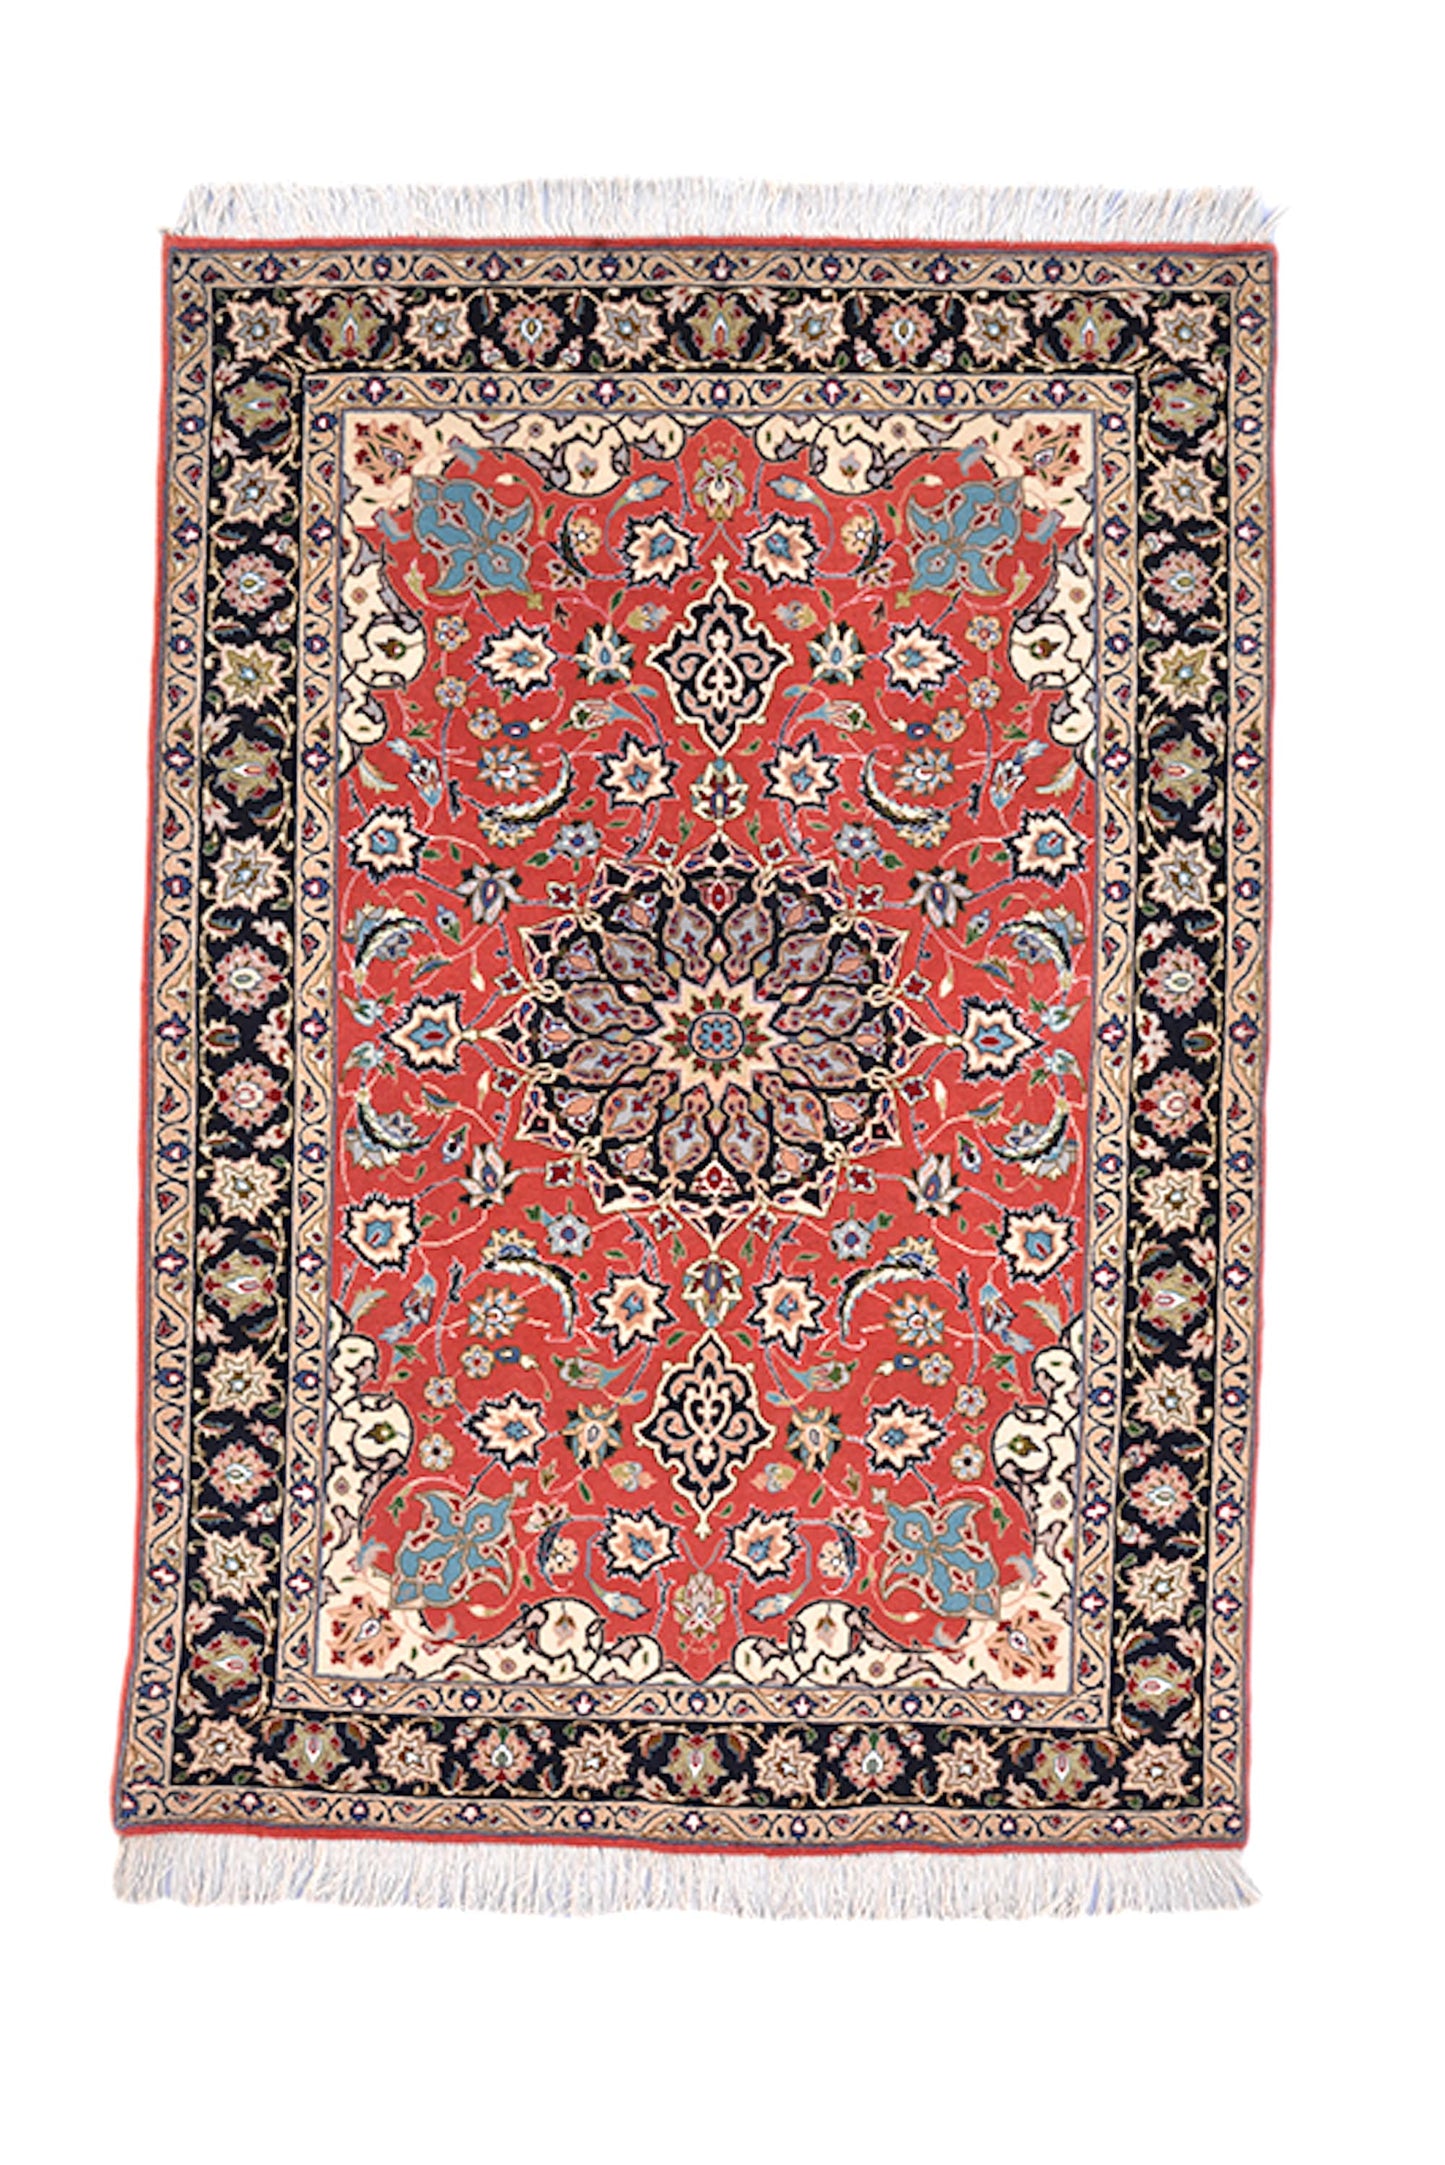 One of a kind Bright Color Antique Rug | 3 x 5 Persian Caucasian Rug | Living Room Rug | Accent Hand Knotted Wool Rug | Oriental Floral Rug